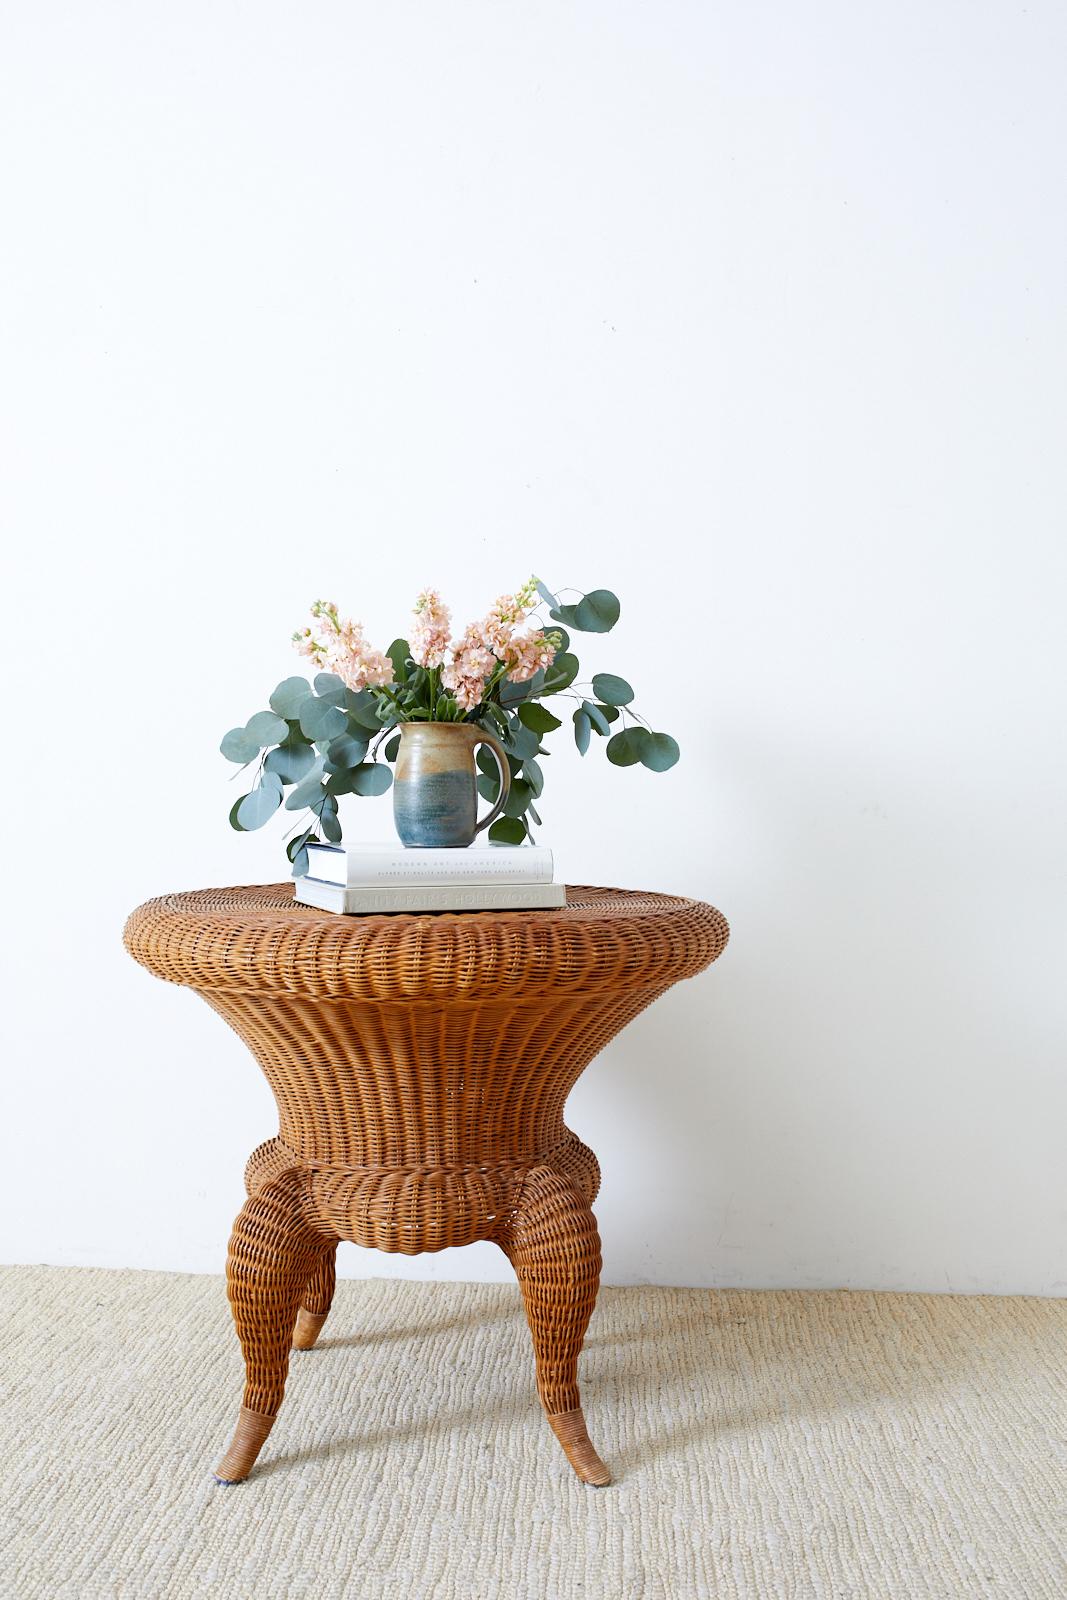 Charming round occasional table or center table made of a rattan frame covered with wicker. The table has a unique waisted hourglass form with whimsical tapered cabriole legs. The top could support a round glass top and be used as a dining or drinks